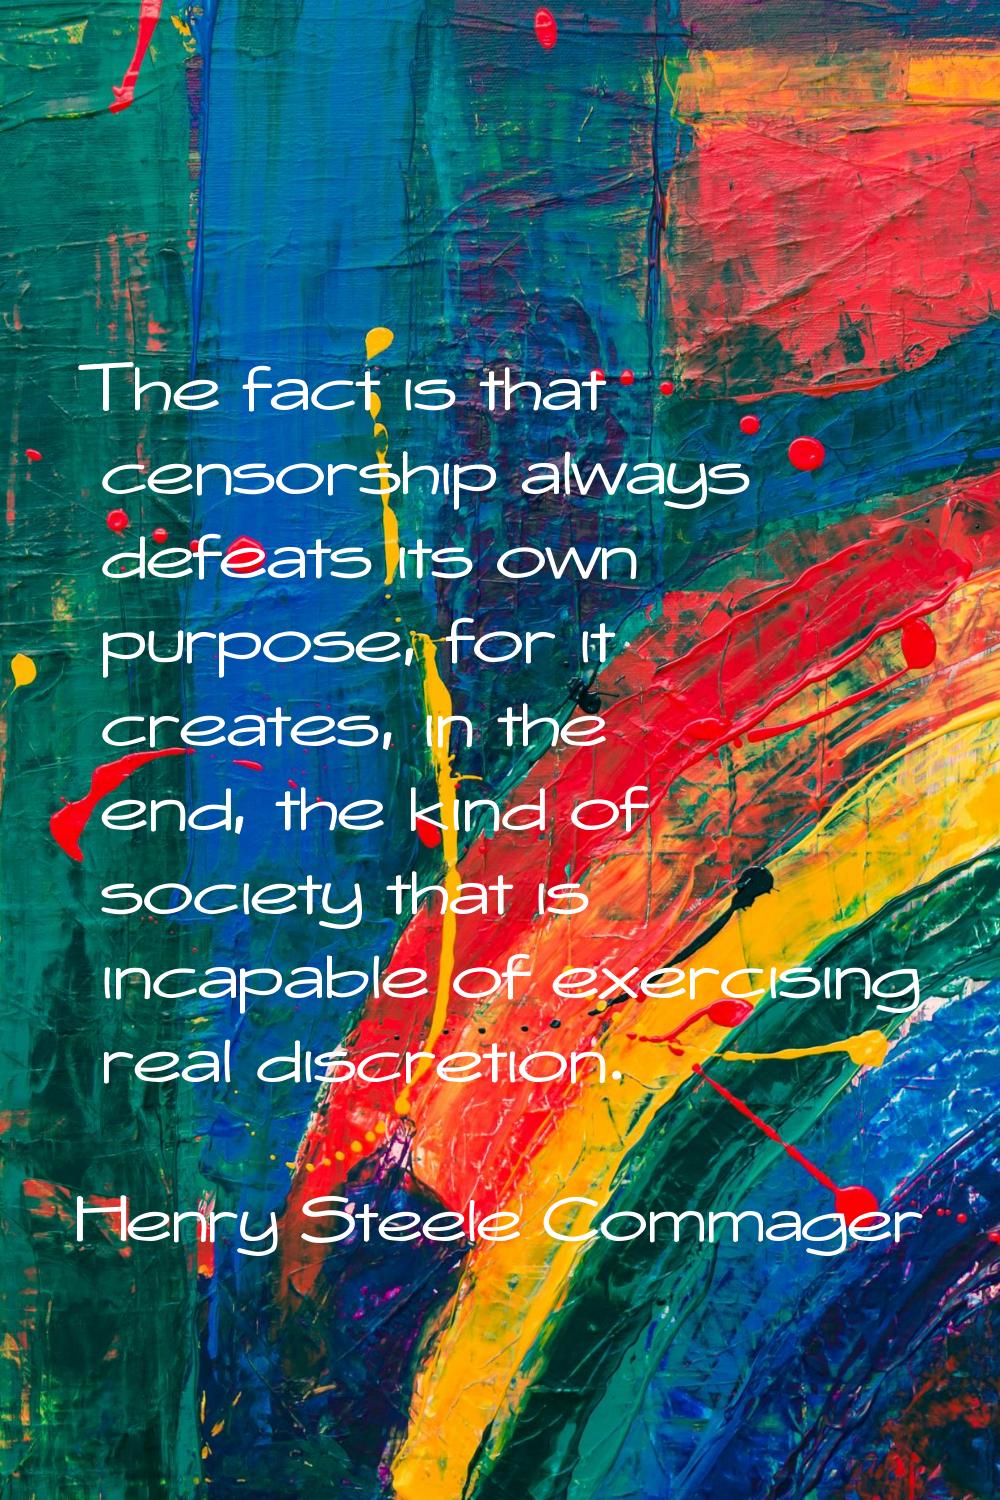 The fact is that censorship always defeats its own purpose, for it creates, in the end, the kind of